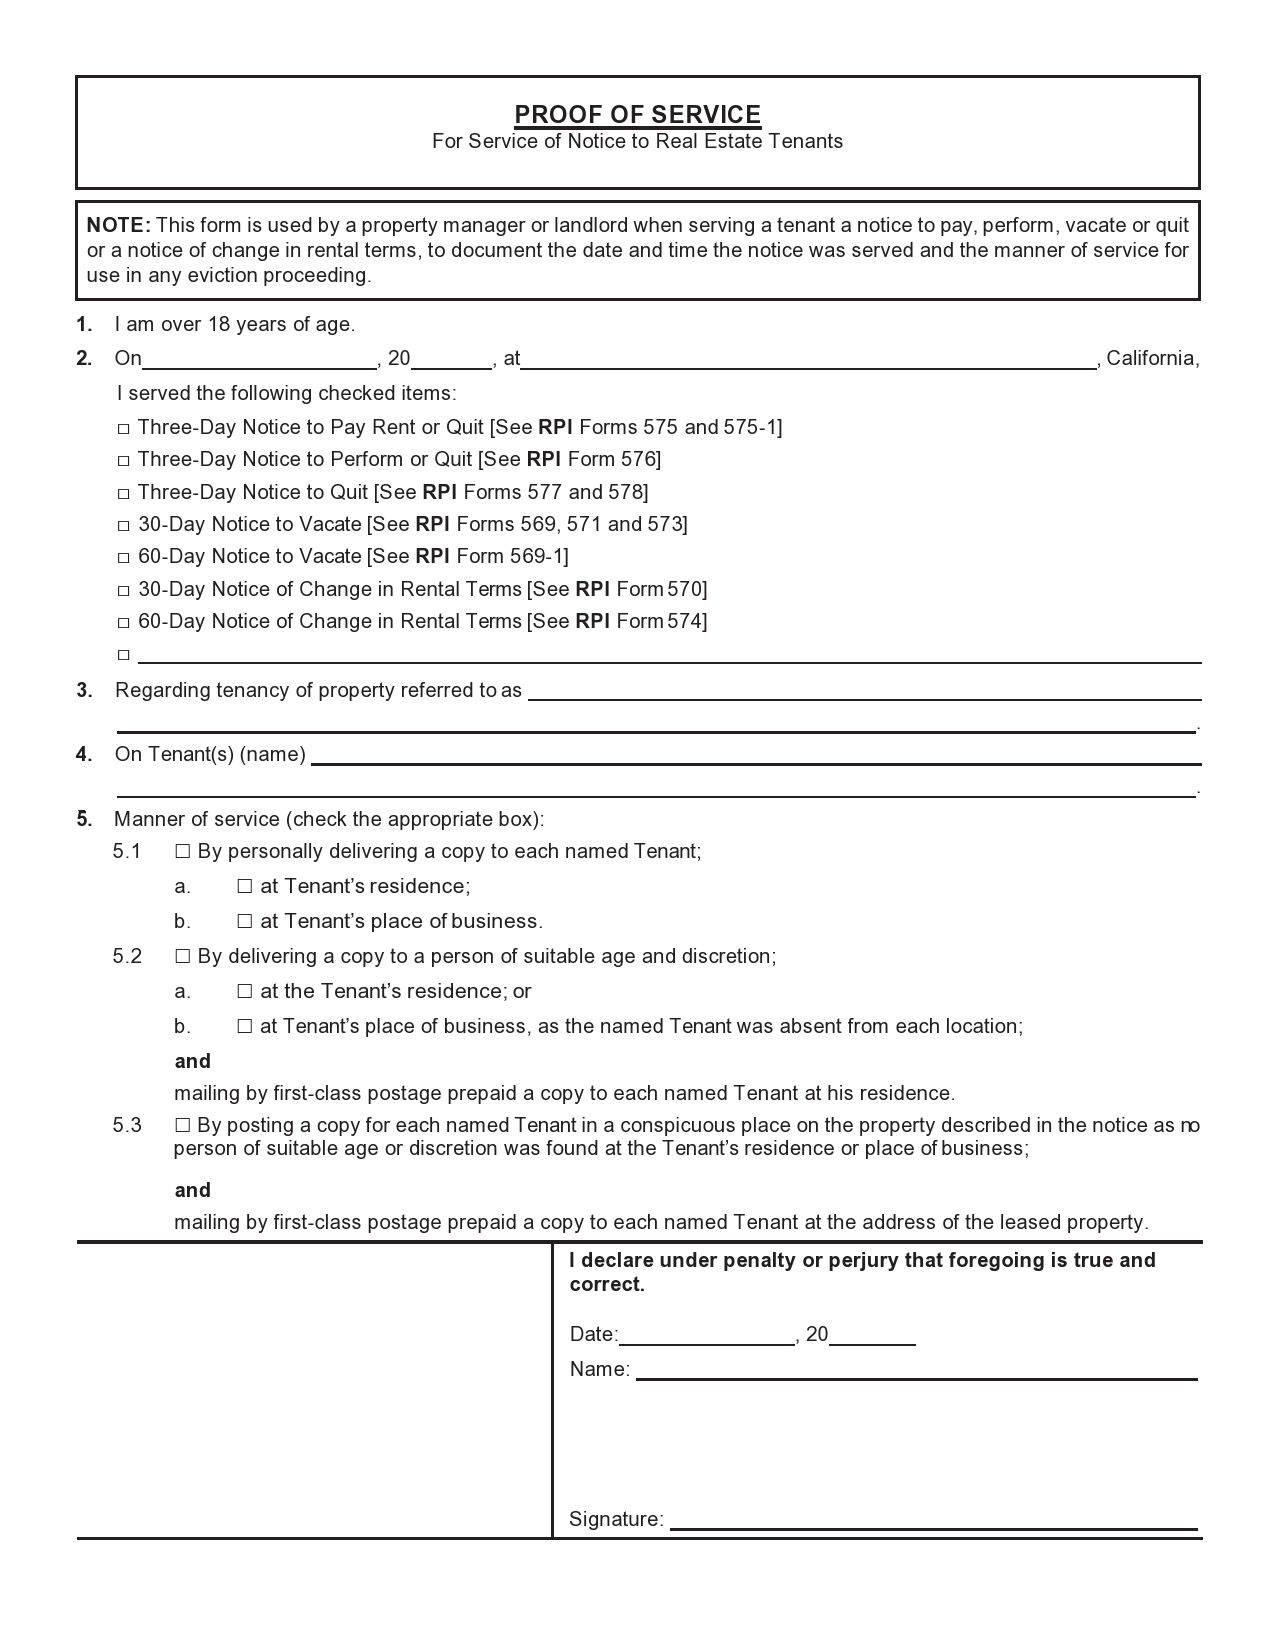 Free proof of service form 26